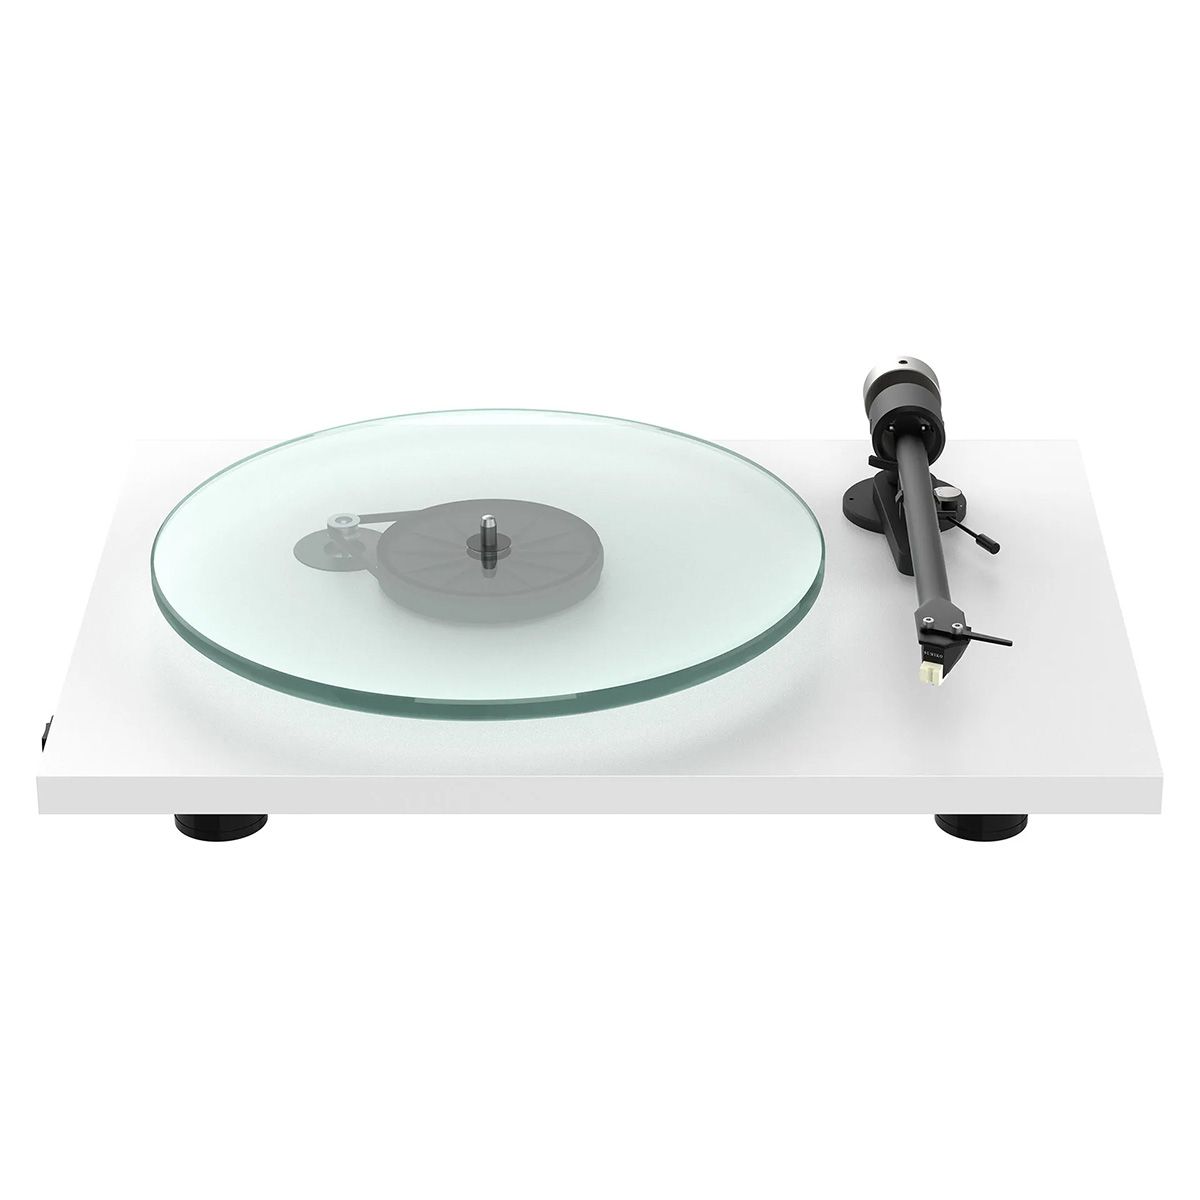 Pro-Ject T2 Hi-Fi Turntable - Satin White - angled front view